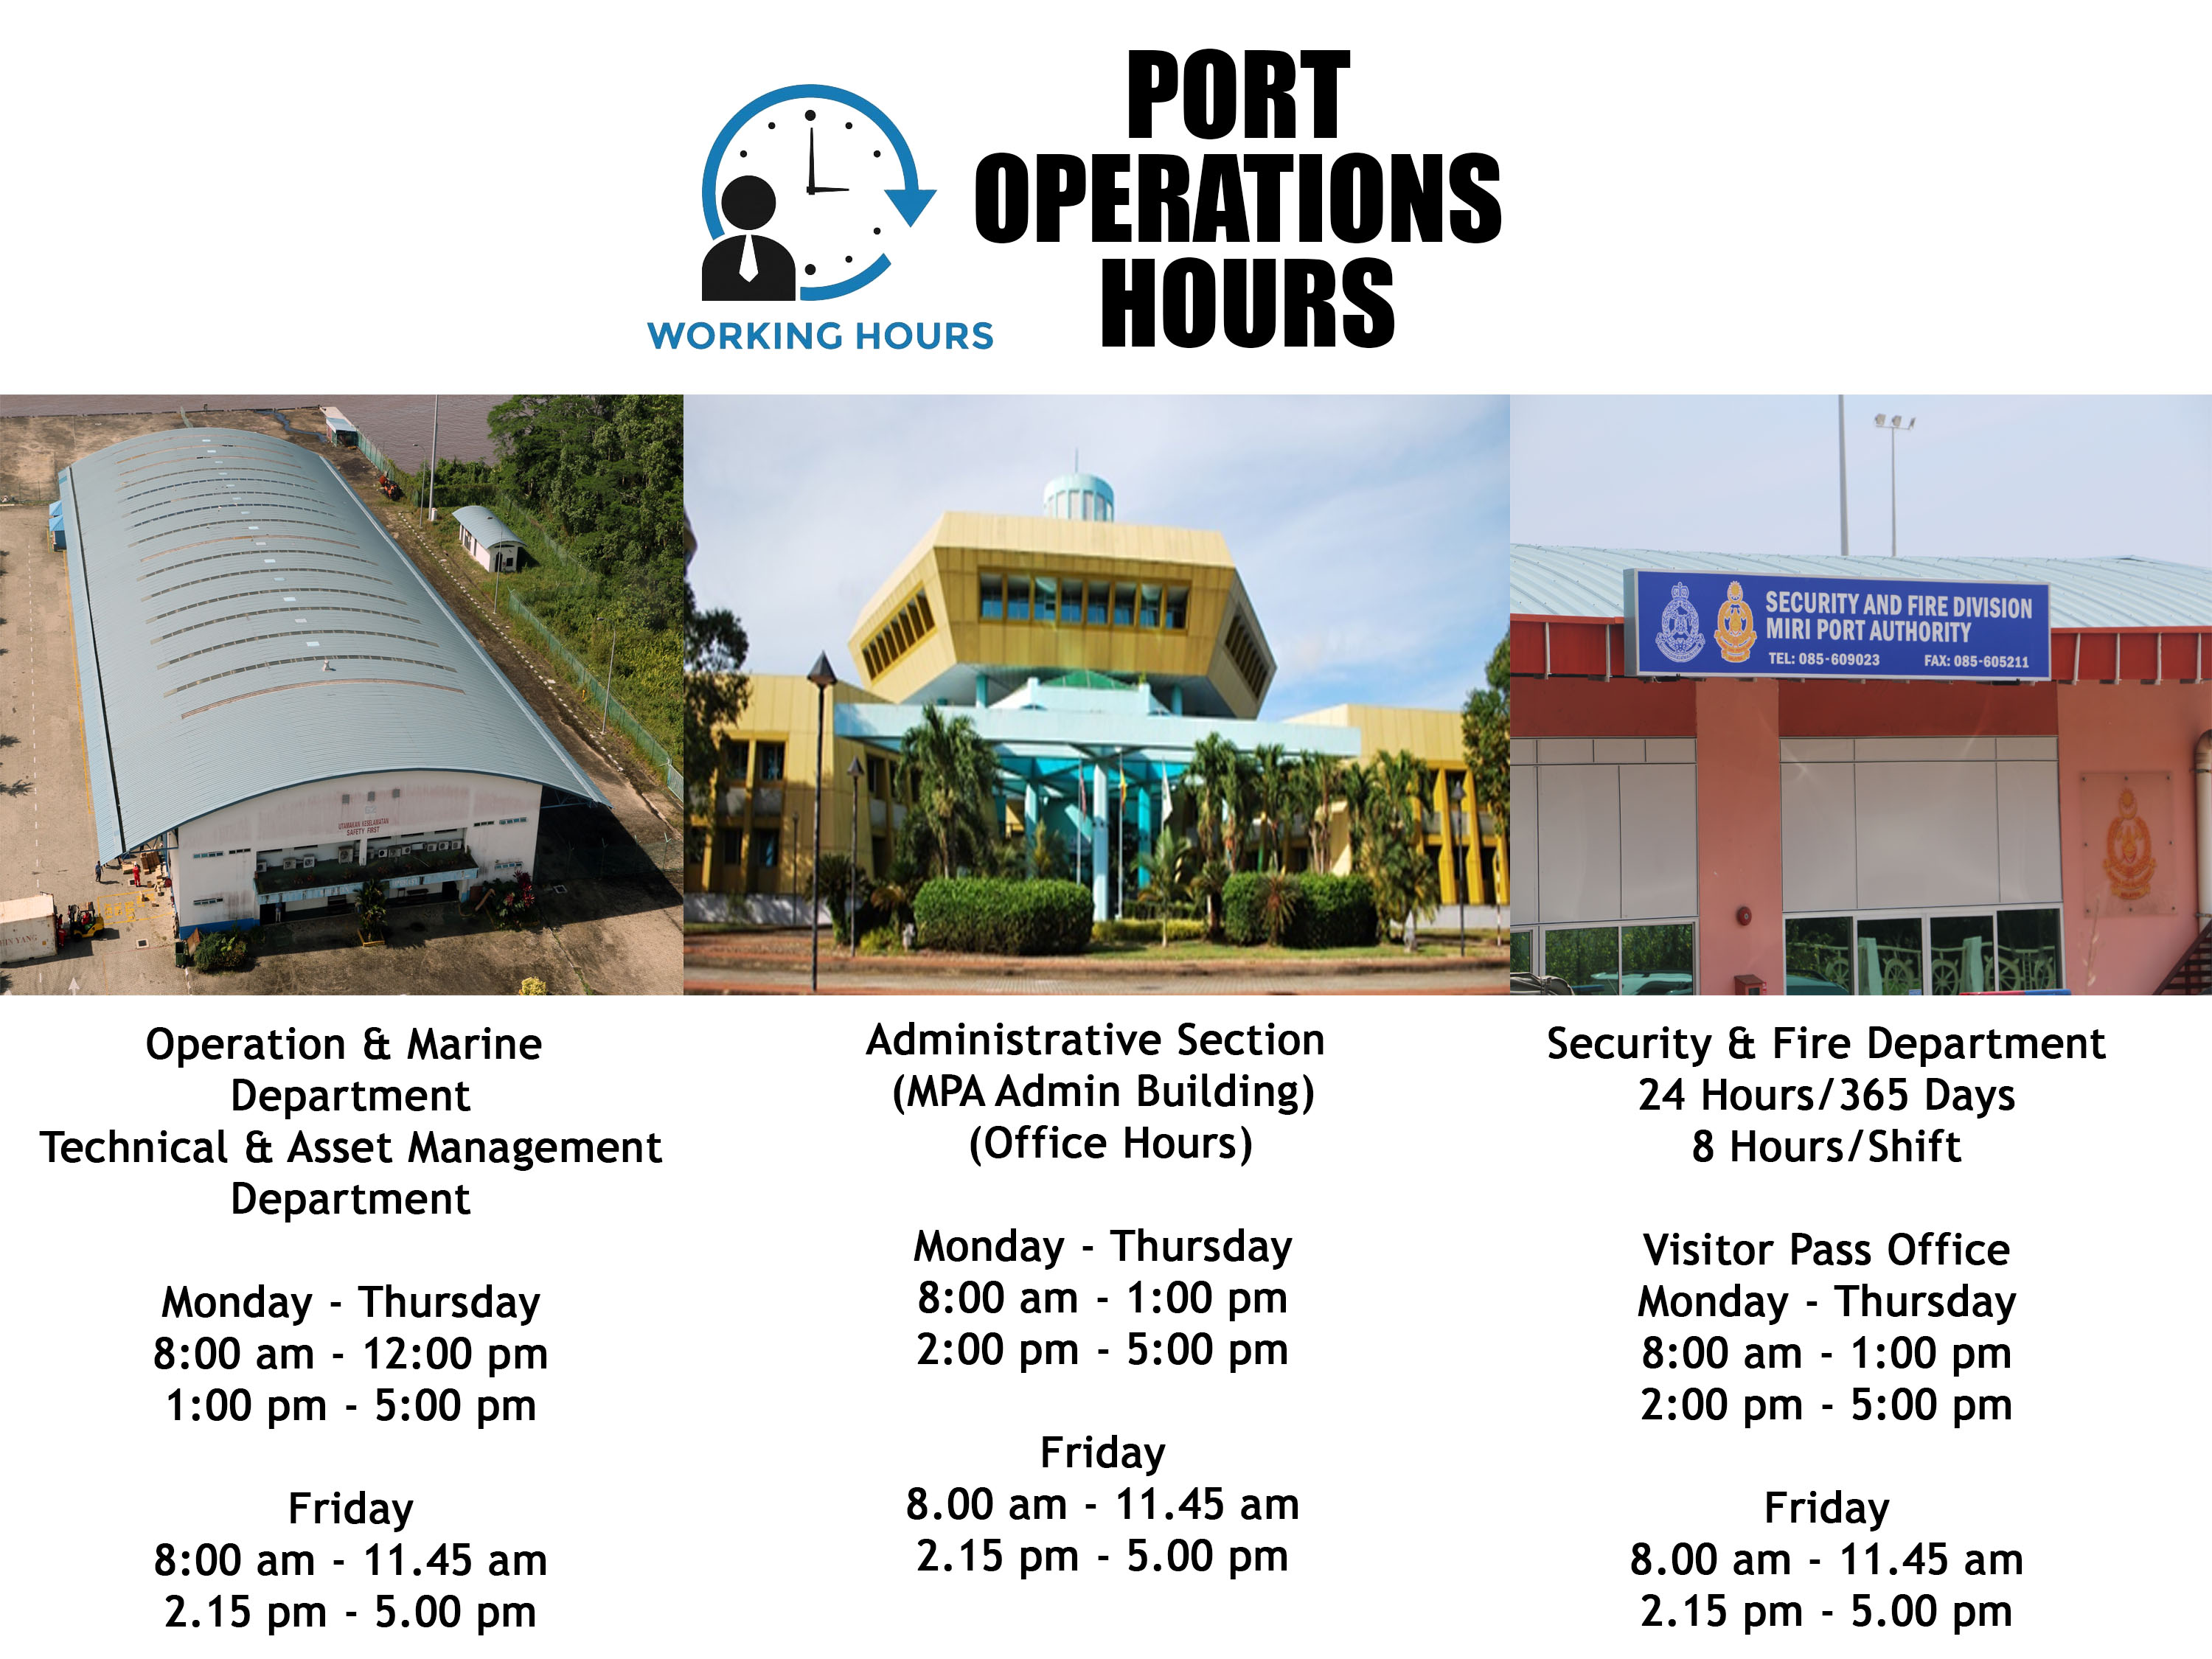 PORT OPERATION HOURS